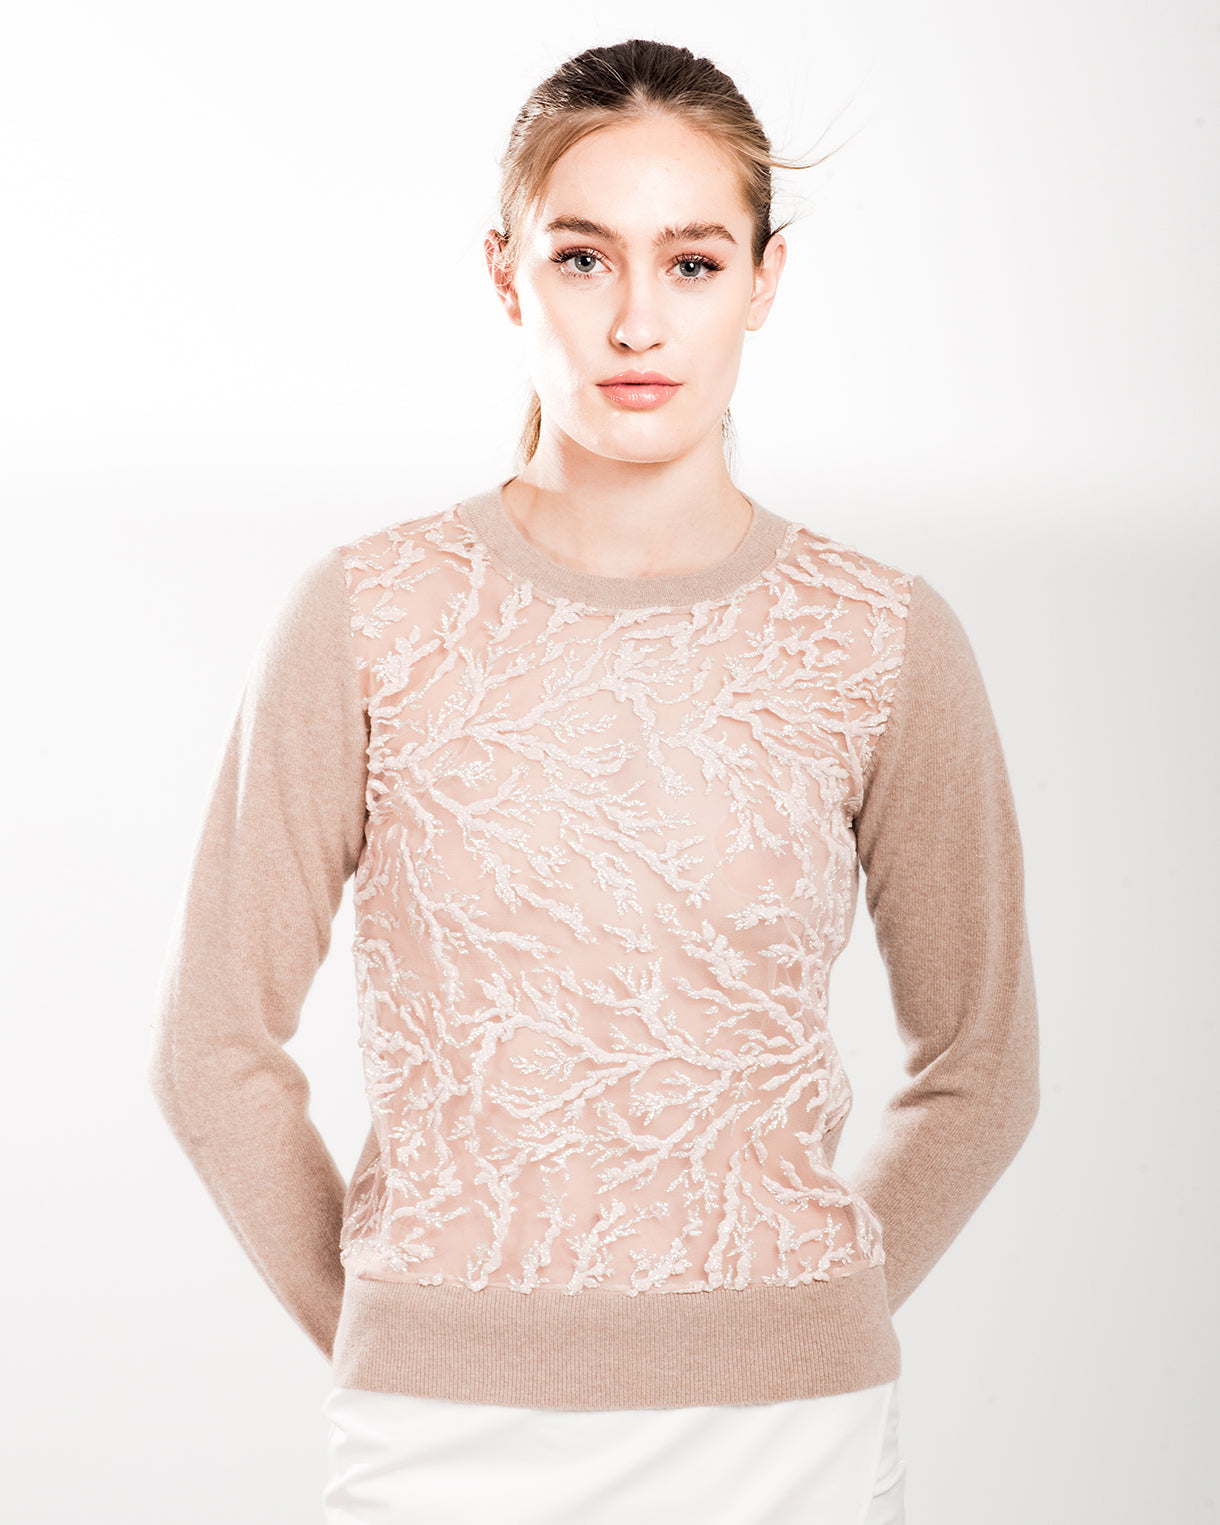 SMALL OATMEAL LONG SLEEVE CREW NECK CASHMERE SWEATER WITH BLUSH COLORED CORAL AND ICY SPARKLE EMBROIDERED TULLE FRONT WITH TULLE LINING